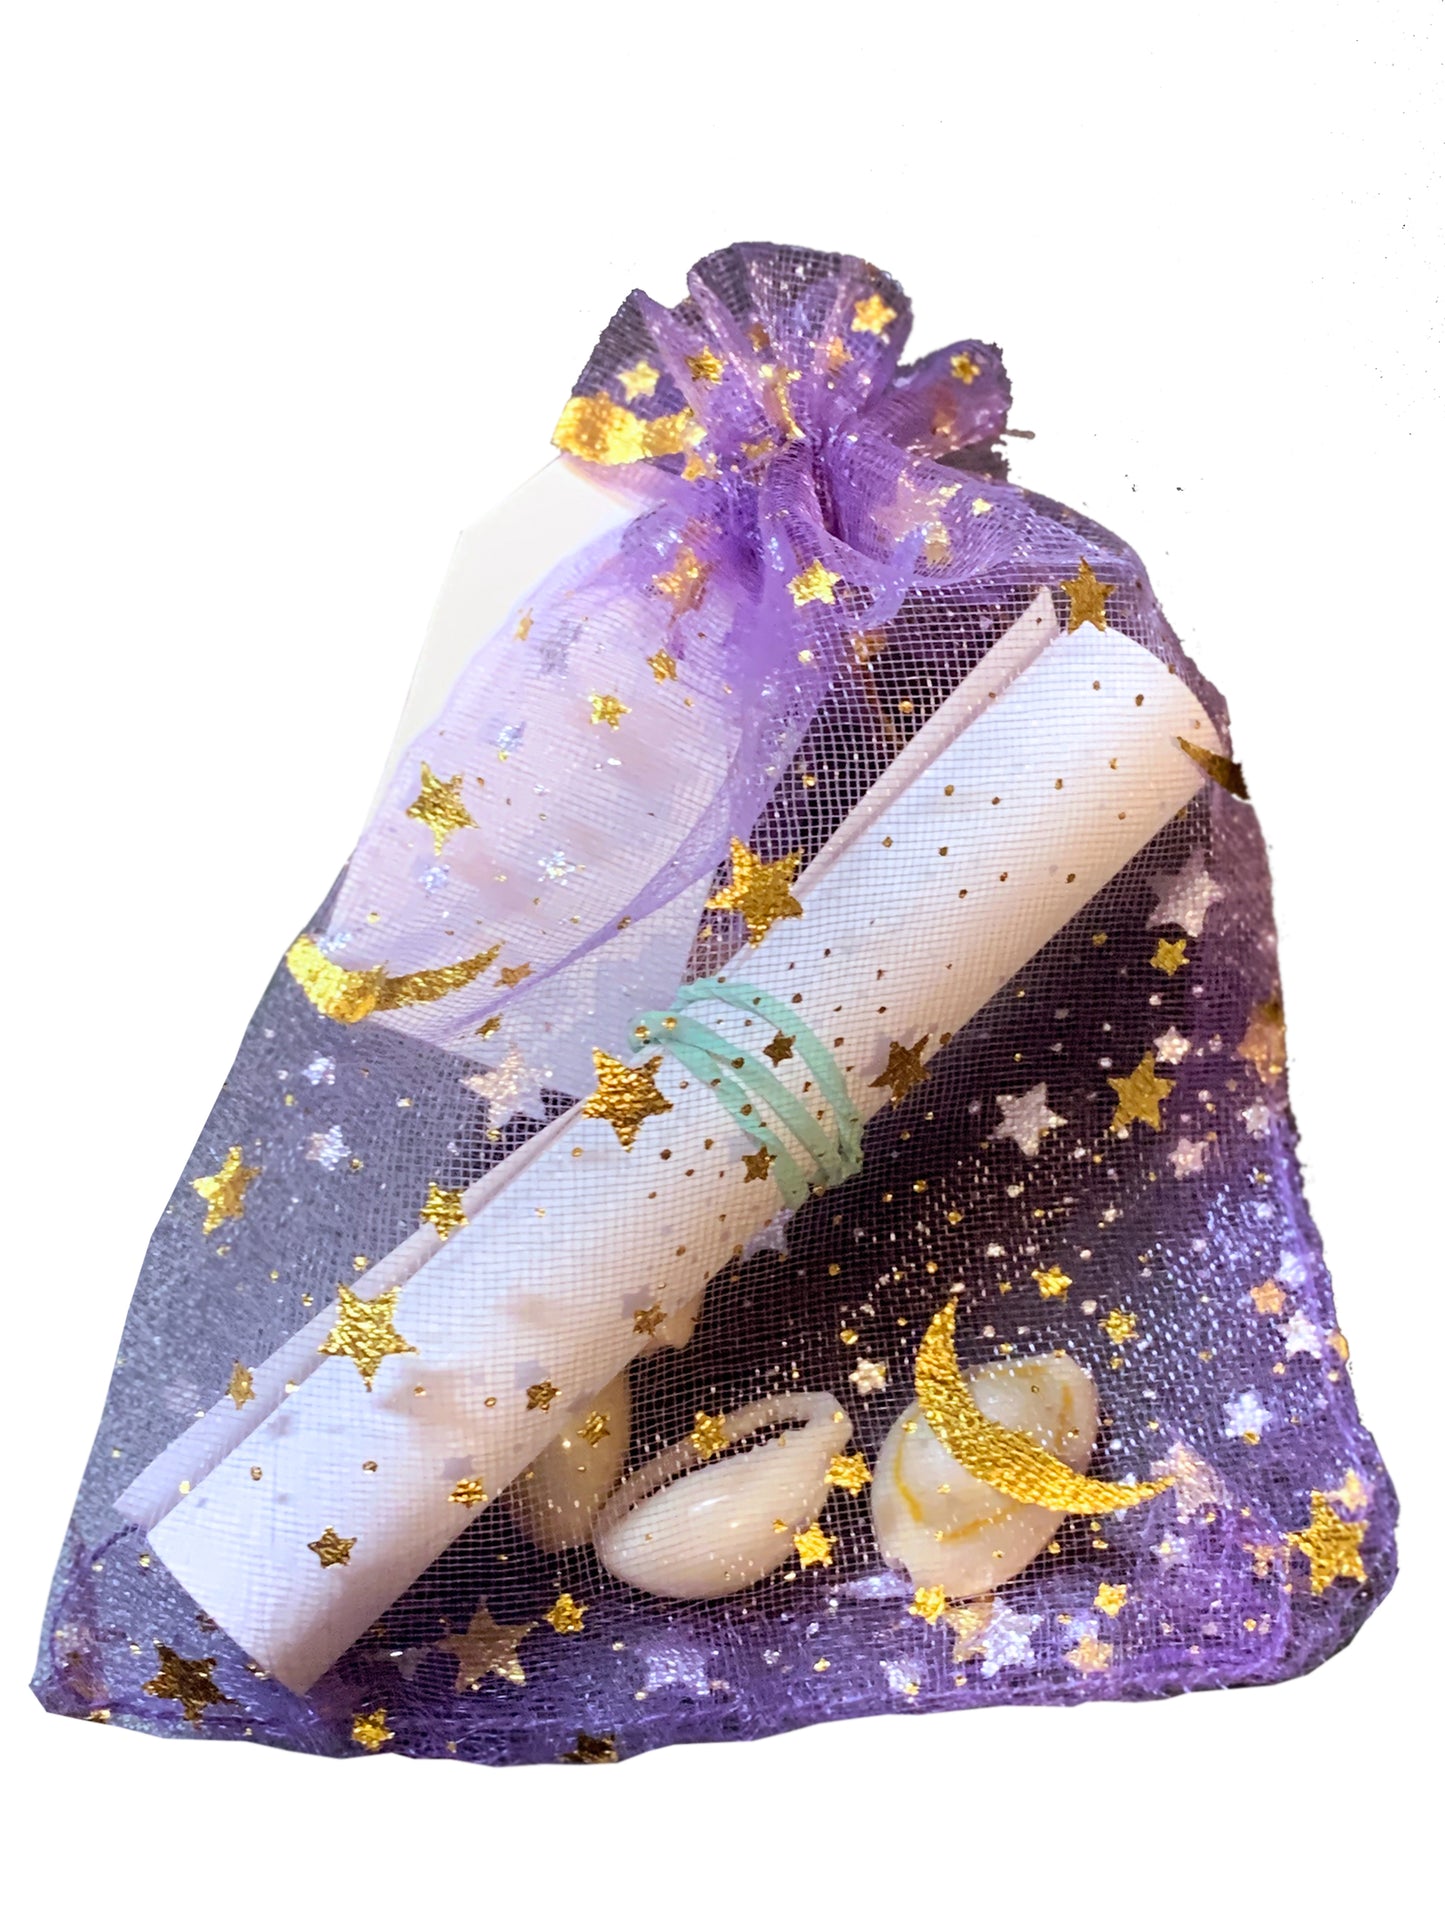 Cowrie Shell Divination Kit - Moonlight Potions & Charms